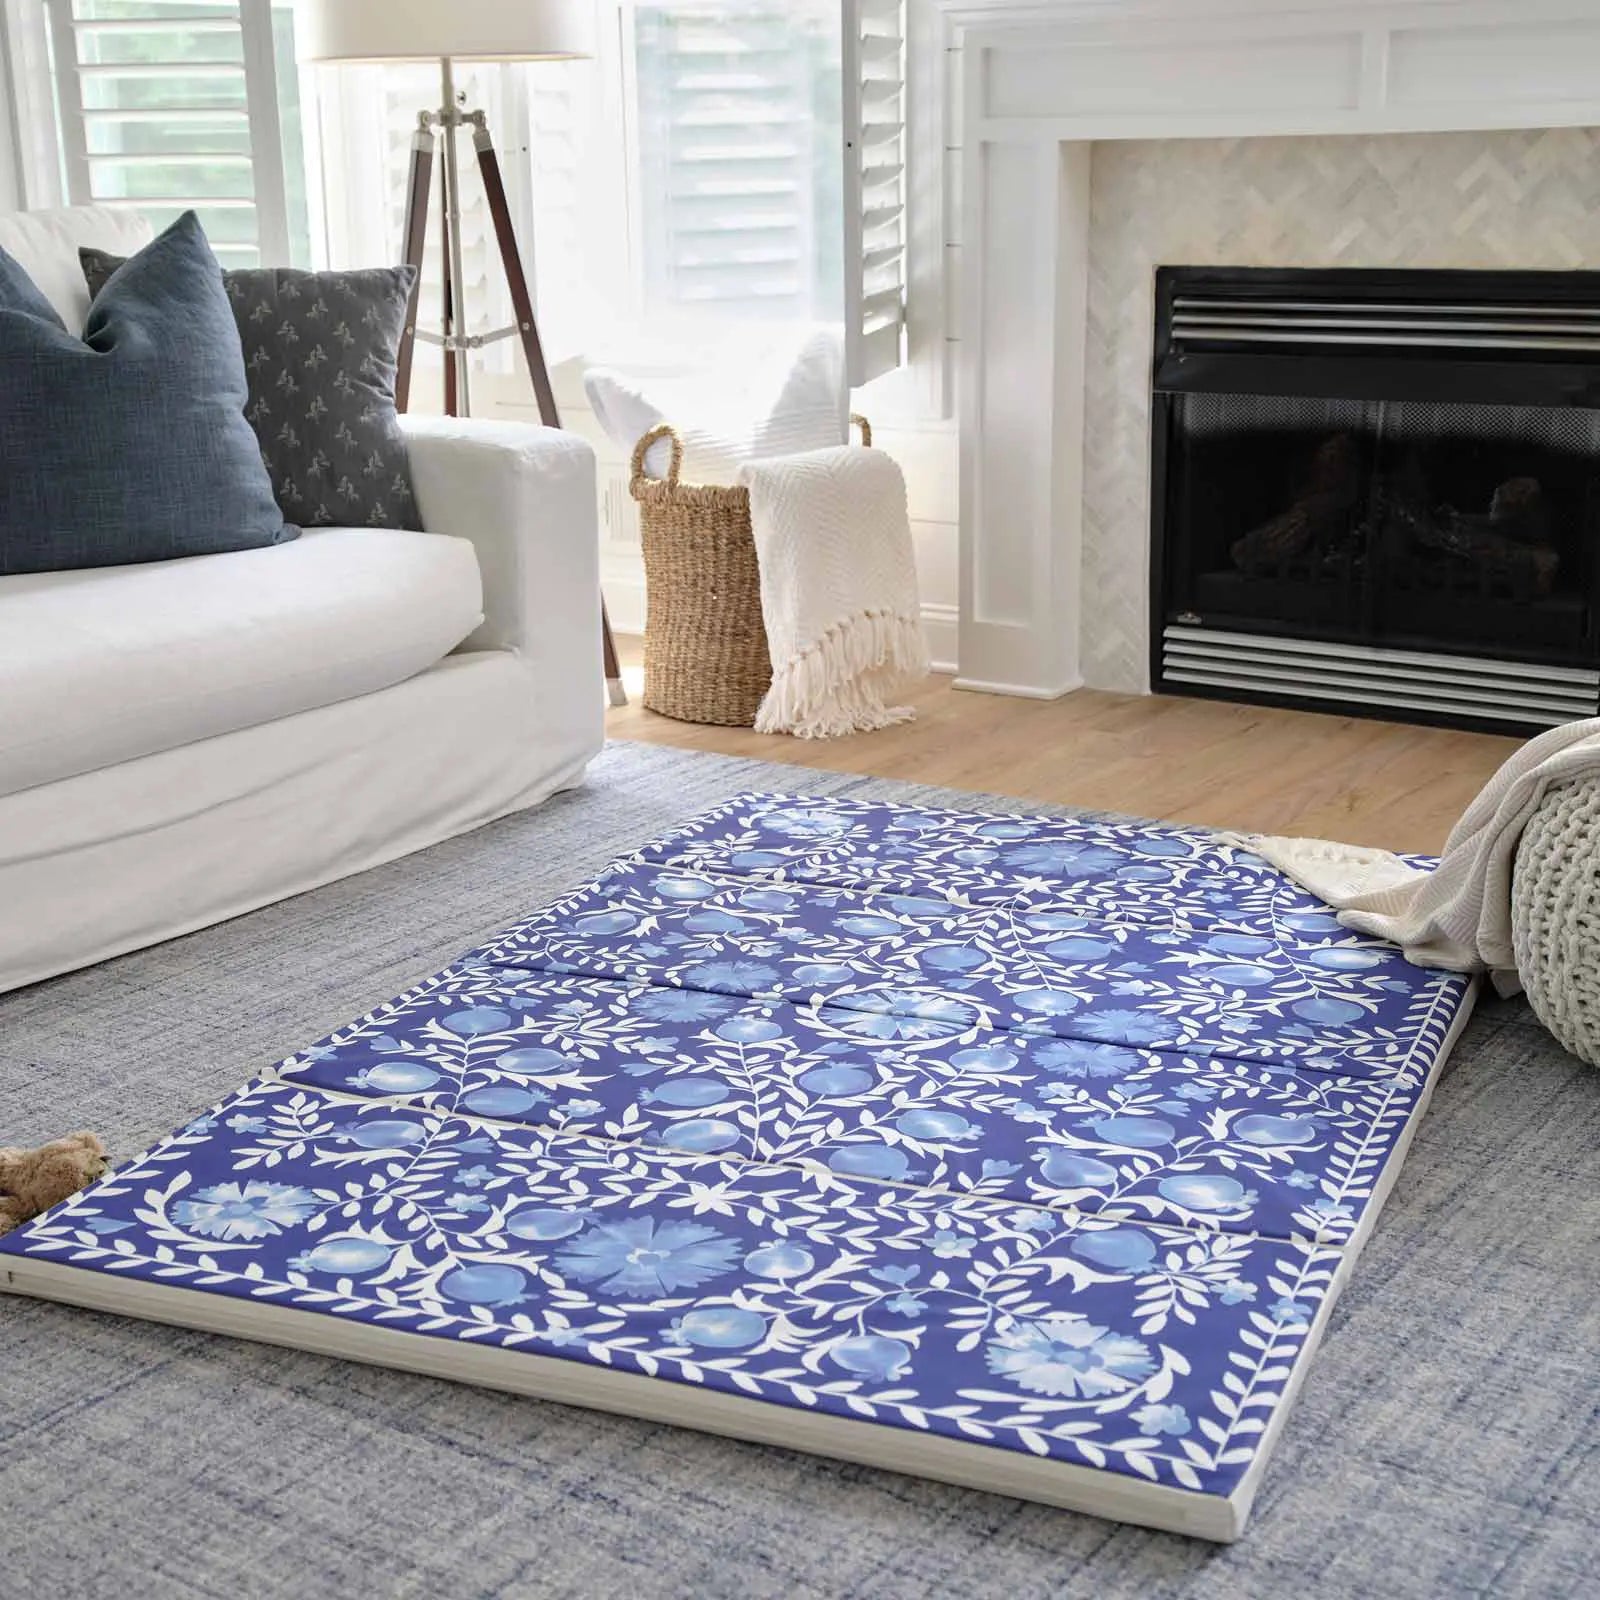 Deep sea blue and white floral tumbling mat shown in living room in front of a couch with blanket, pouf, and plush toy on the floor